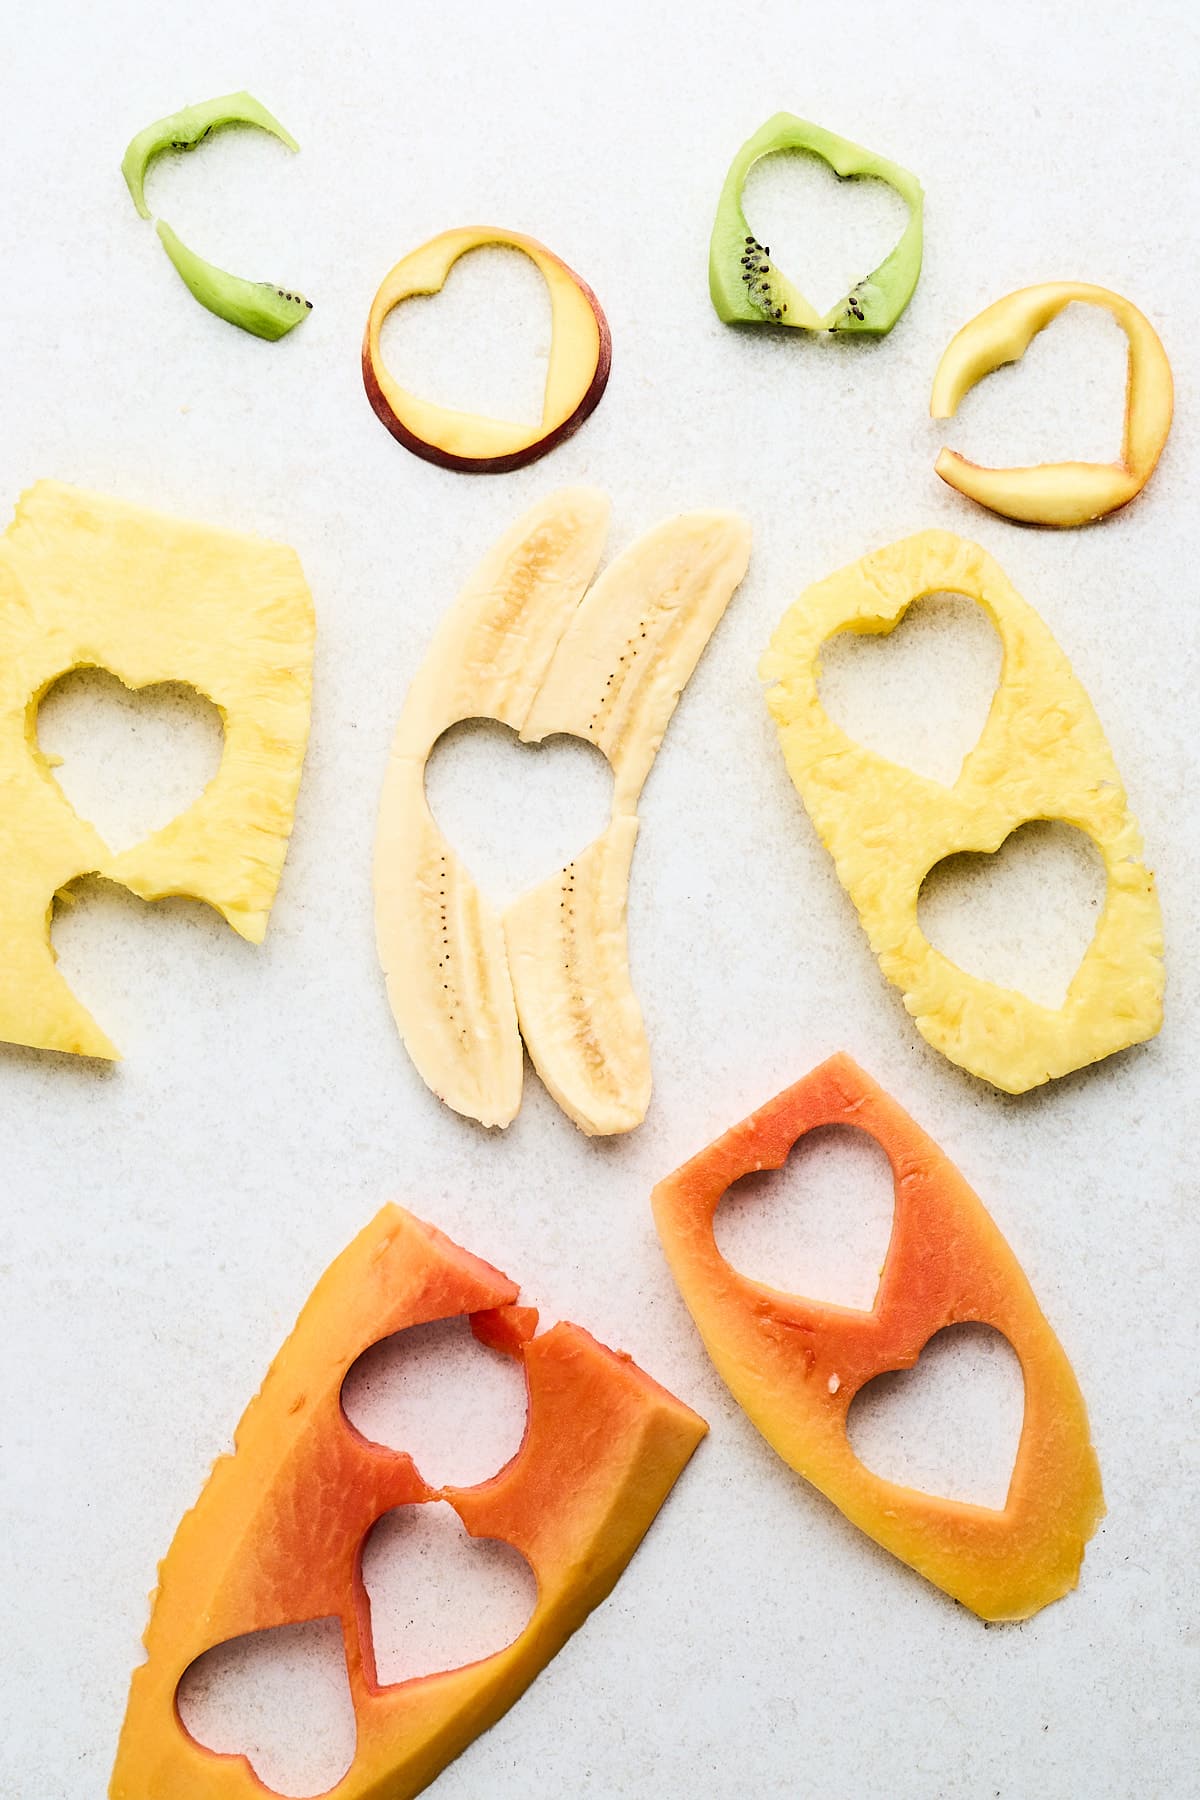 Fruit scraps from heart cut outs.